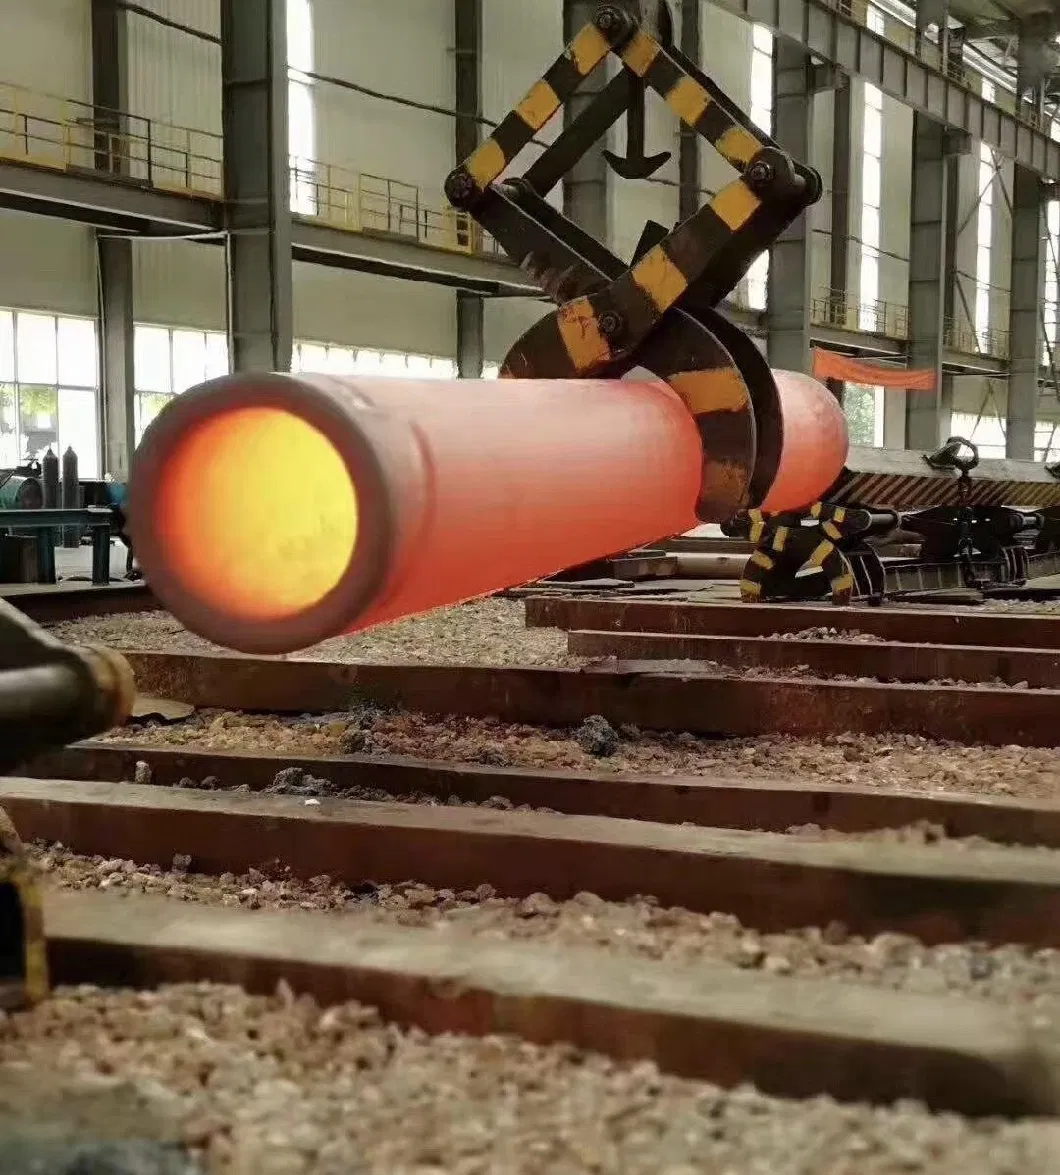 ASTM A106 Carbon Steel Pipe API 5L Gr. B LSAW SSAW Seamless Carbon Steel Pipe